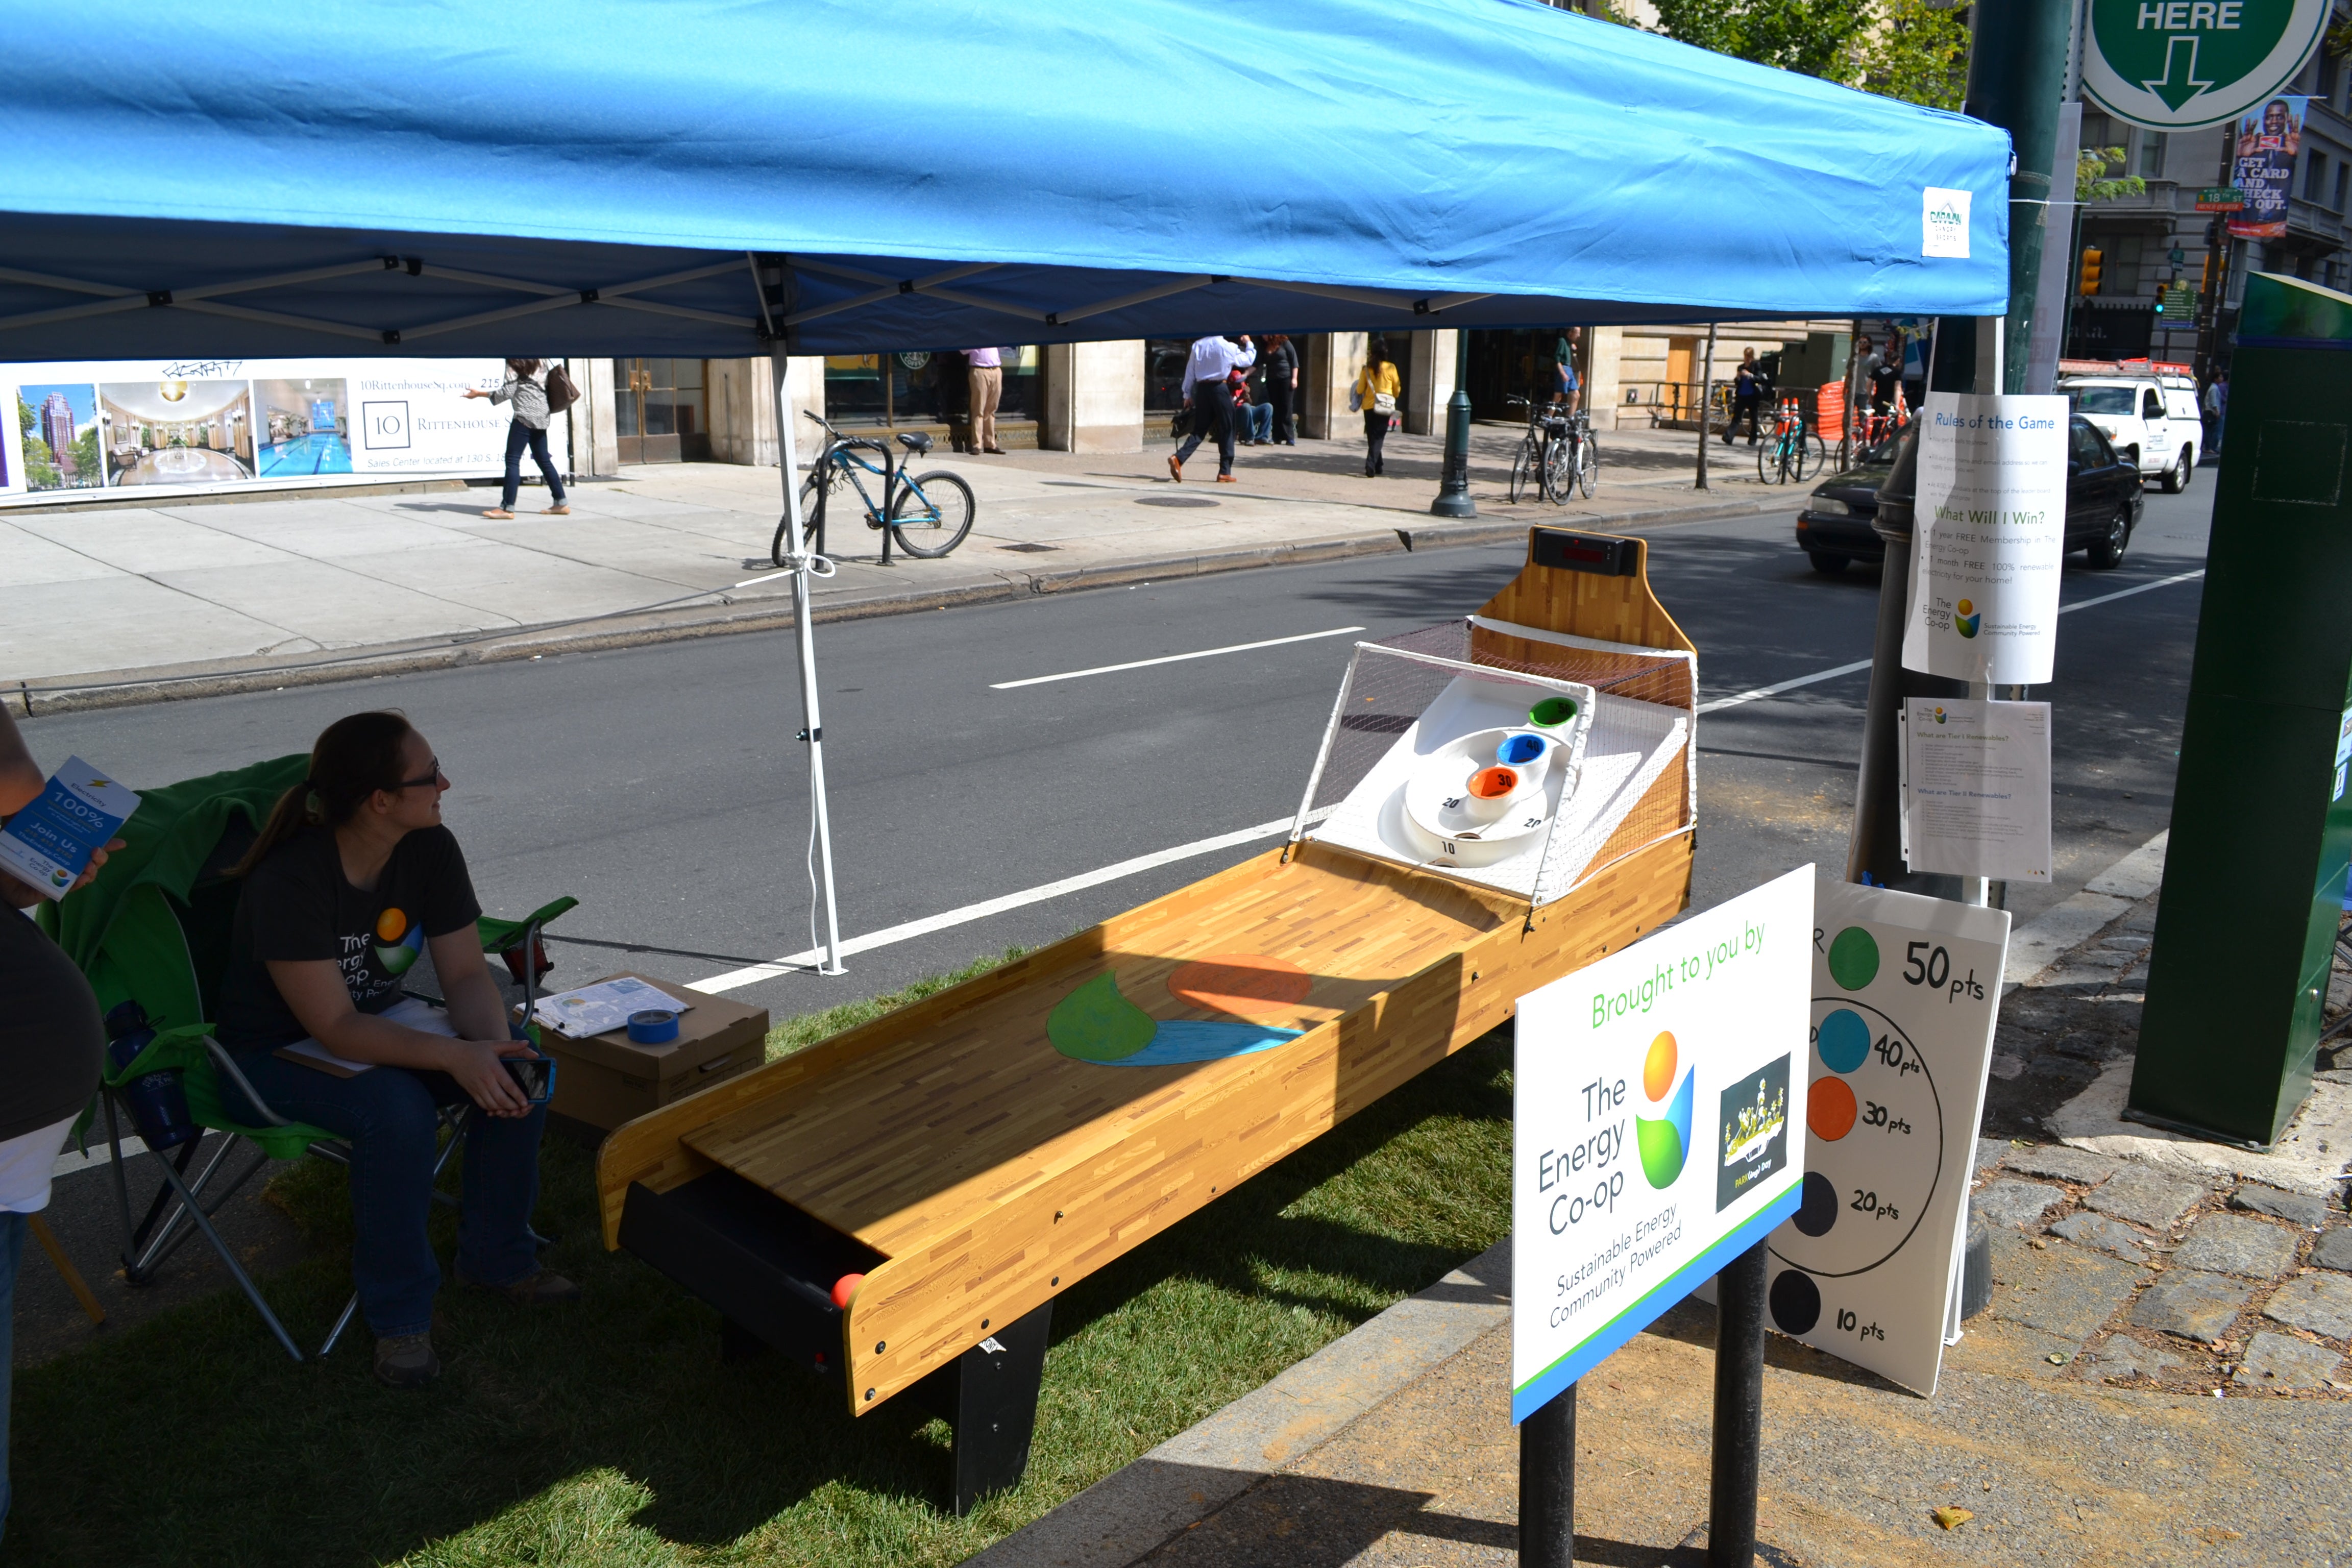 Park(ing) Day: The Energy Co-Op